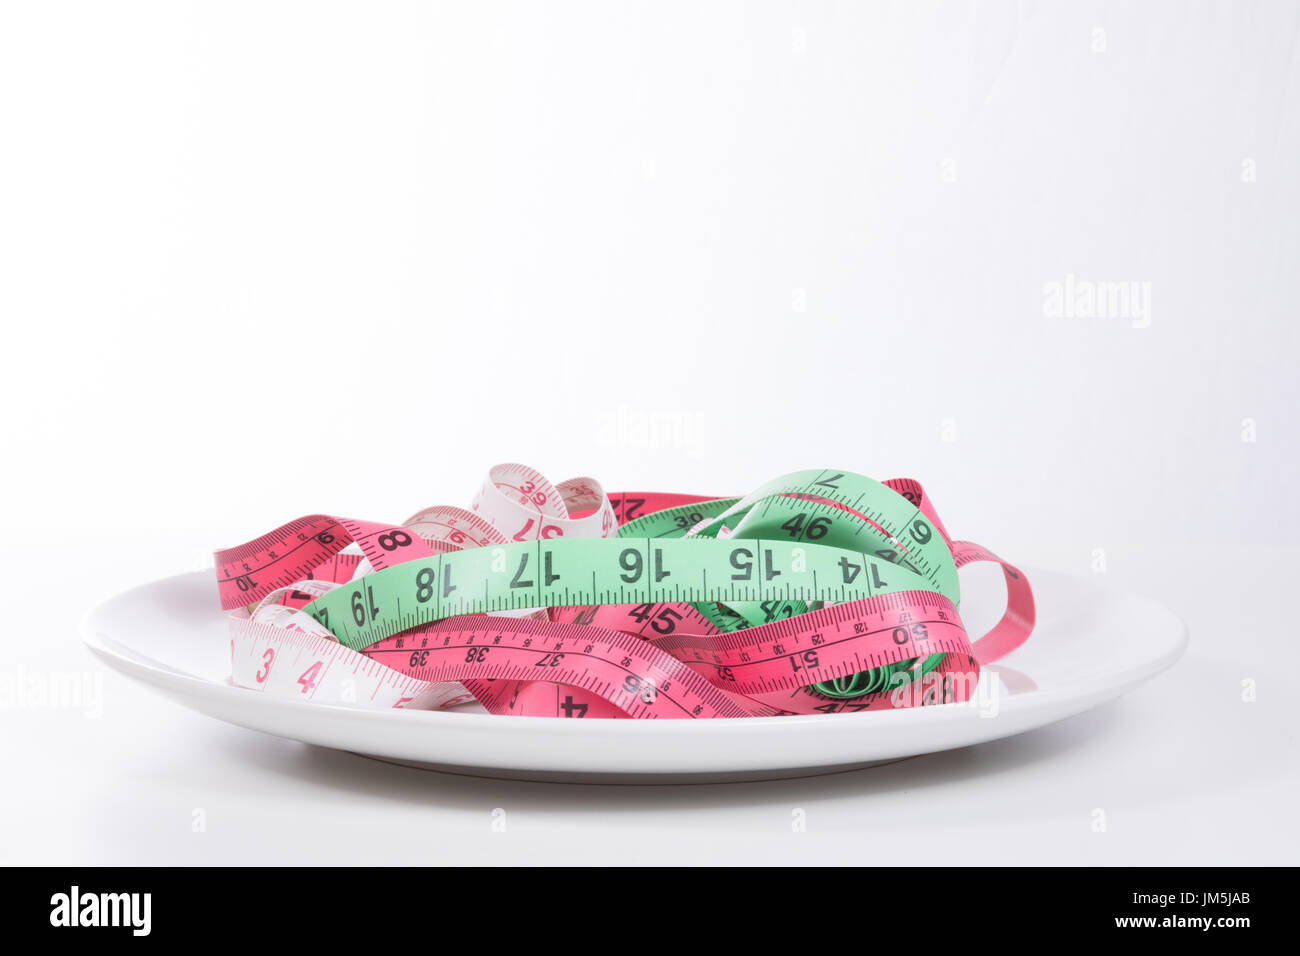 https://c8.alamy.com/comp/JM5JAB/plate-full-of-tangled-colored-measuring-tapes-viewed-from-the-side-JM5JAB.jpg